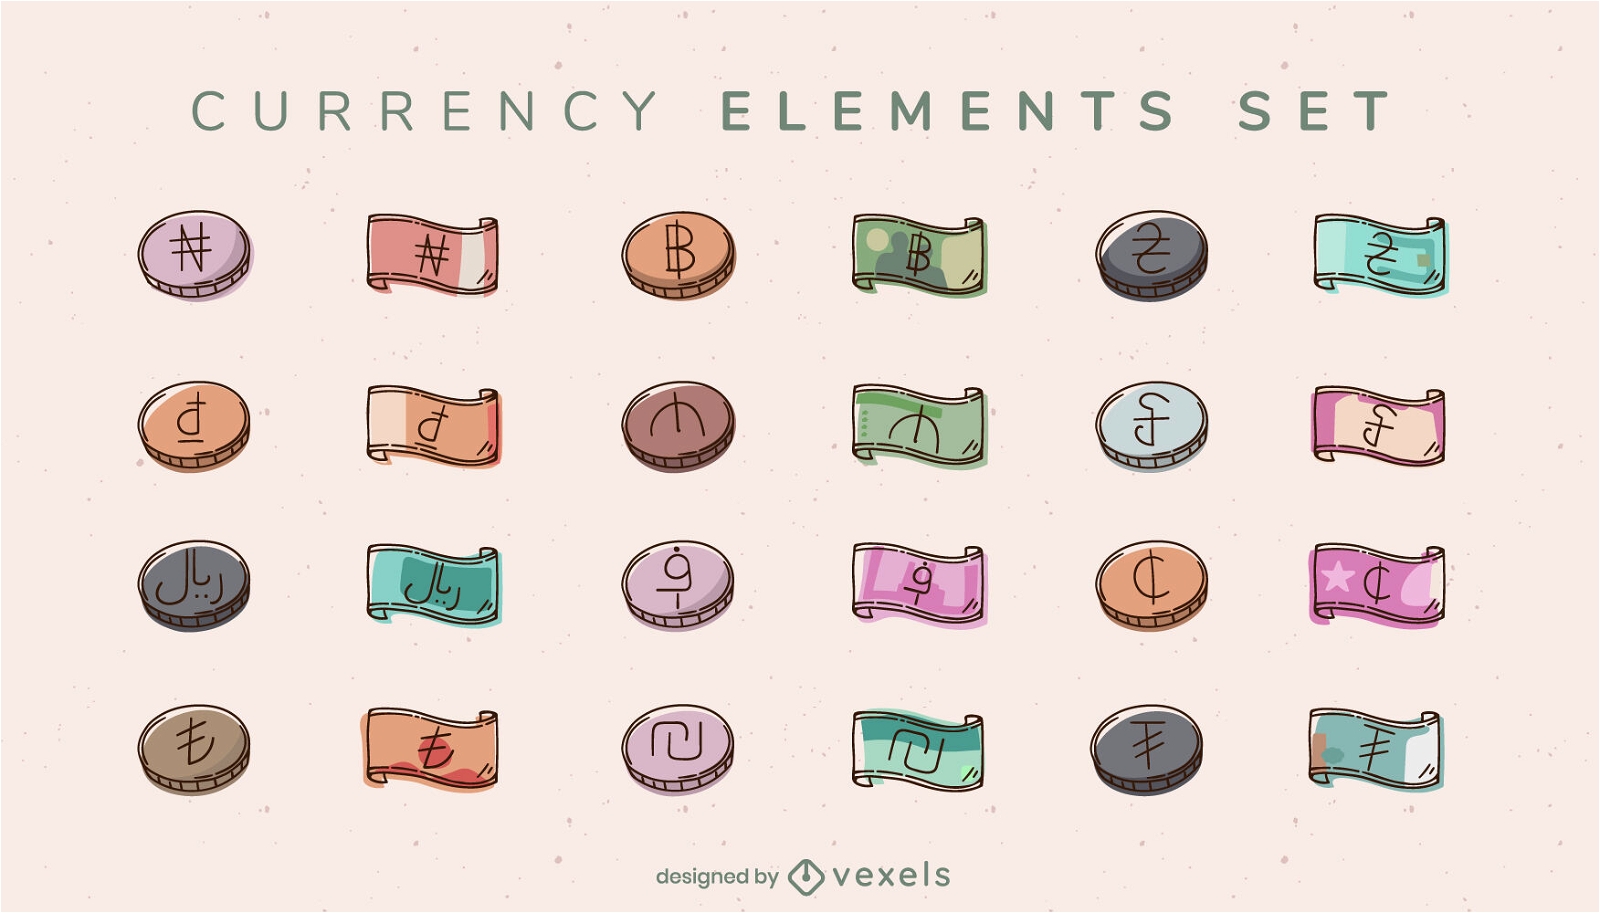 Bills and coins currency elements set